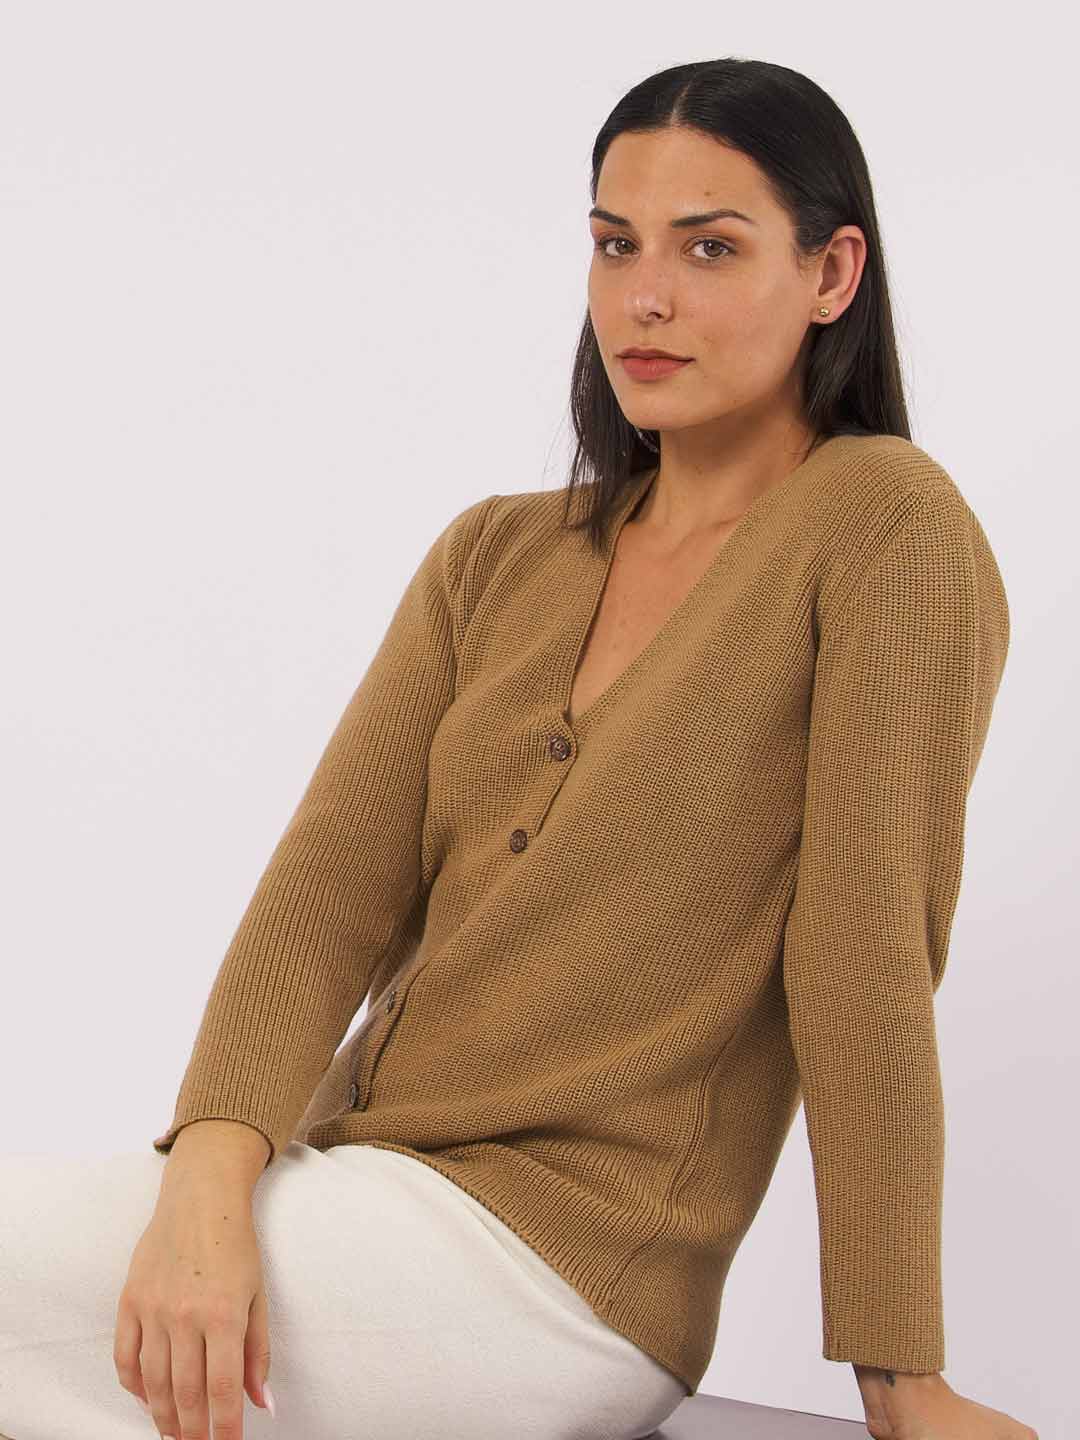 Cardigan with Pearl Knit V-Neck in Merino Wool